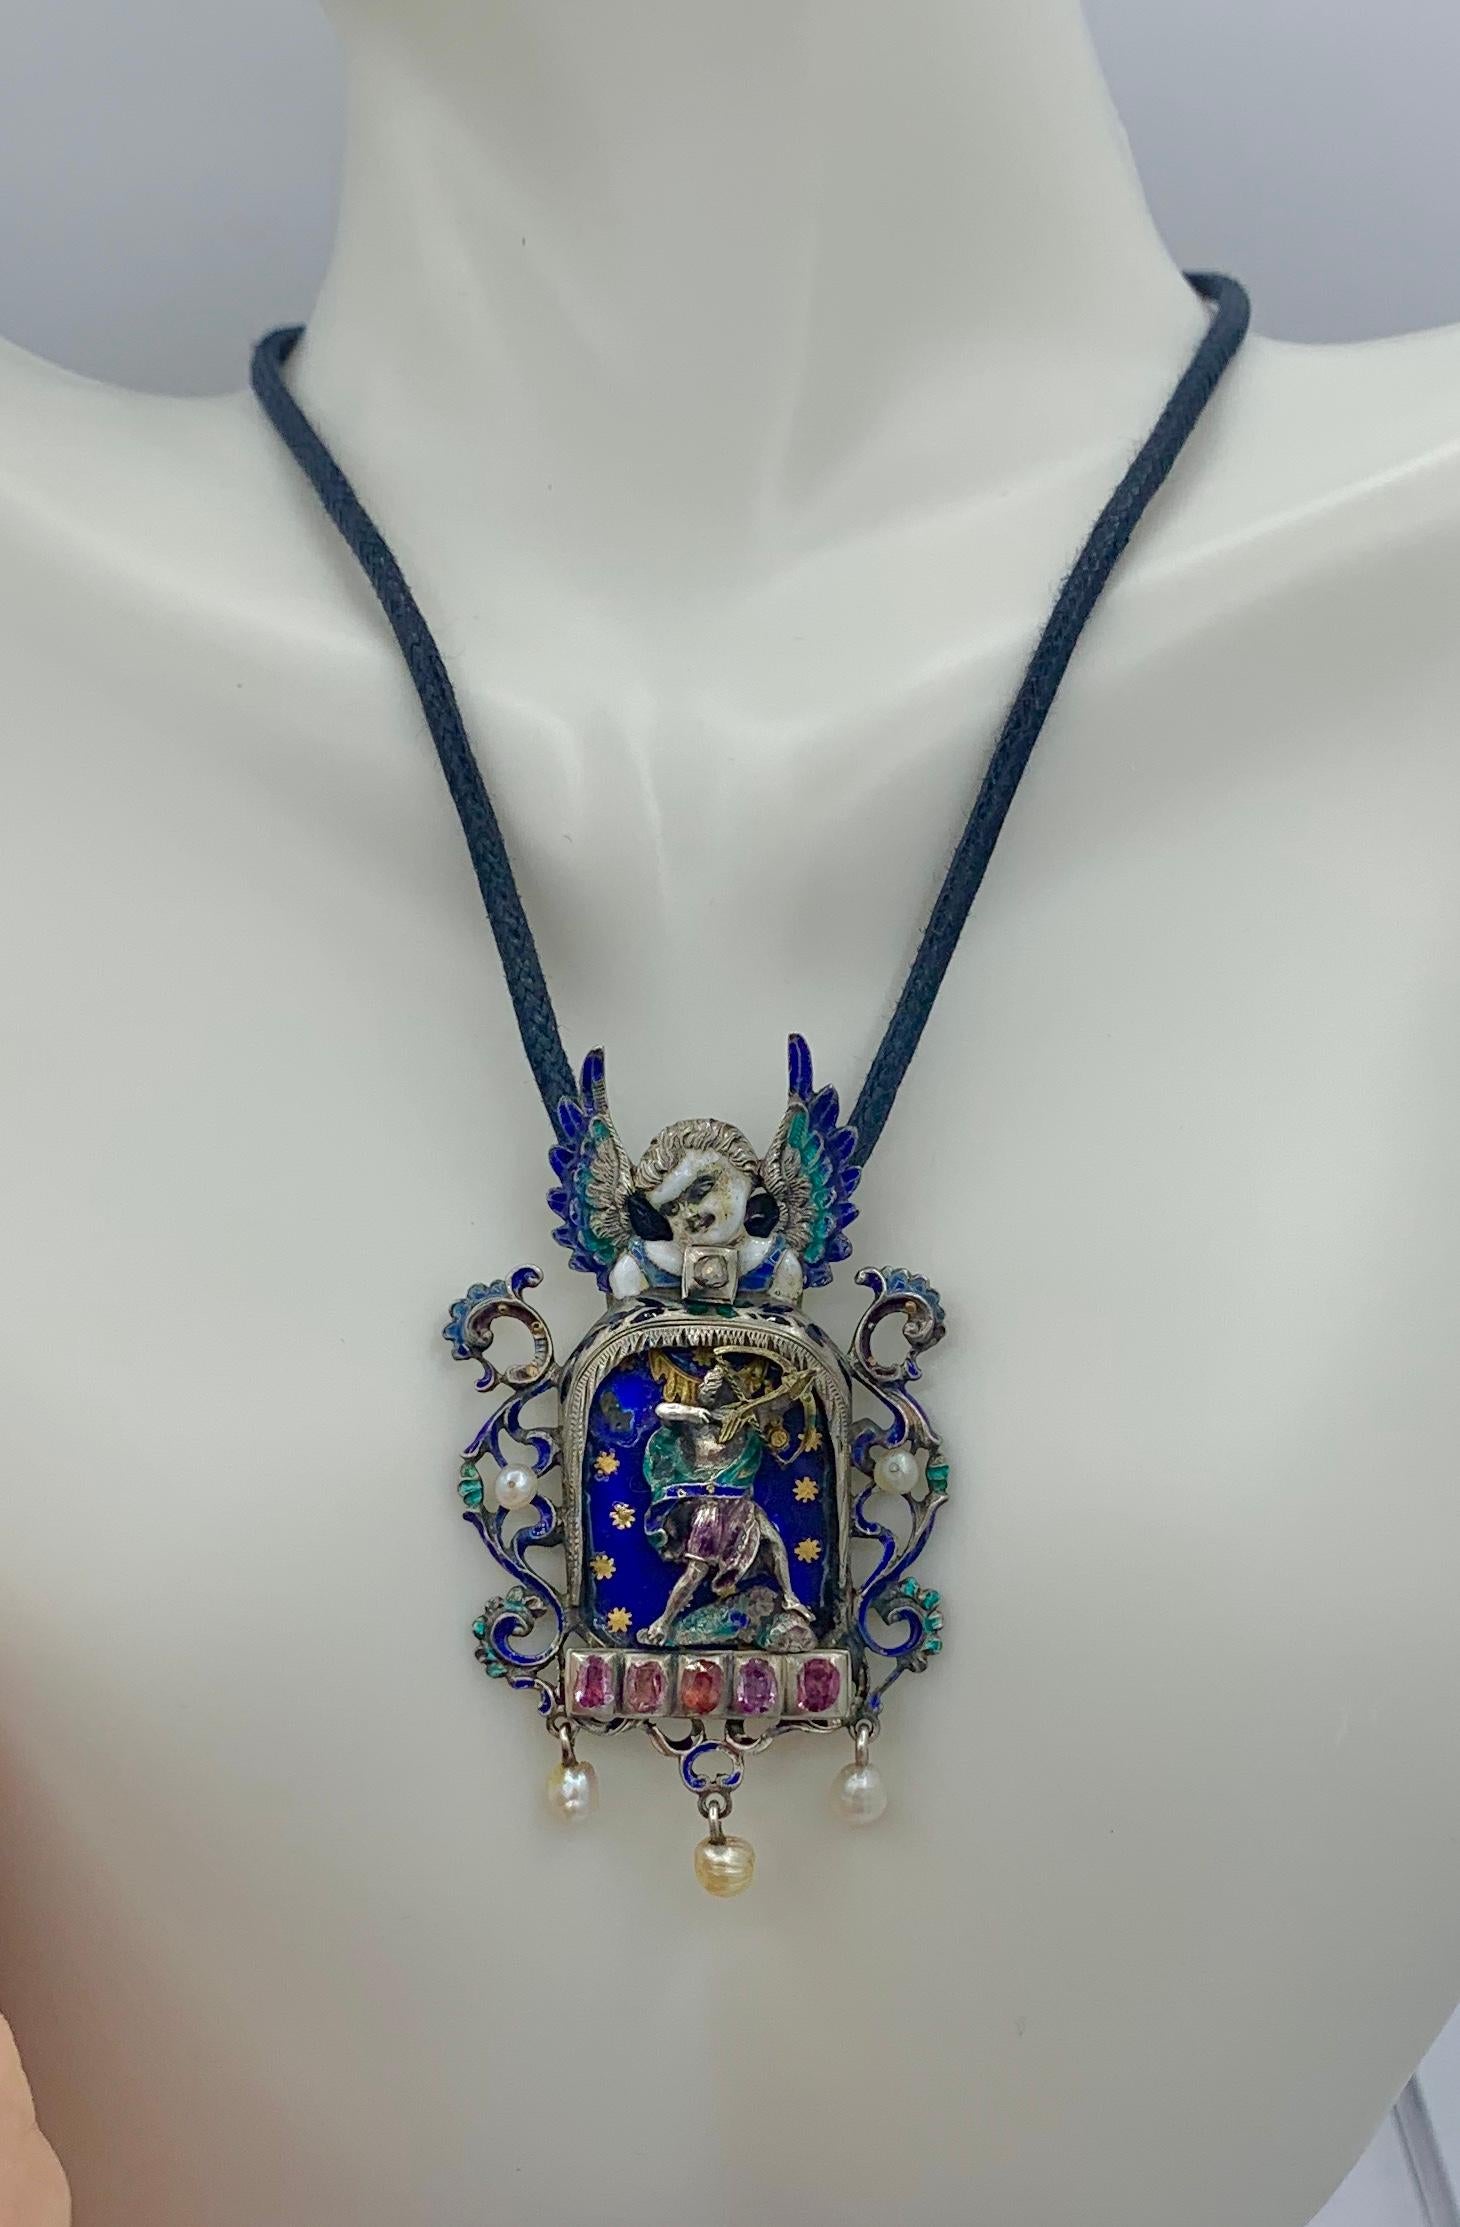 This is a magnificent Museum Quality Austro-Hungarian Ruby, Diamond, Enamel and Pearl Pendant Necklace with a Cupid Archer and his Bow and Arrow with a fabulous Winged Angel at the top.  The pendant is in the Renaissance Revival style and dates to